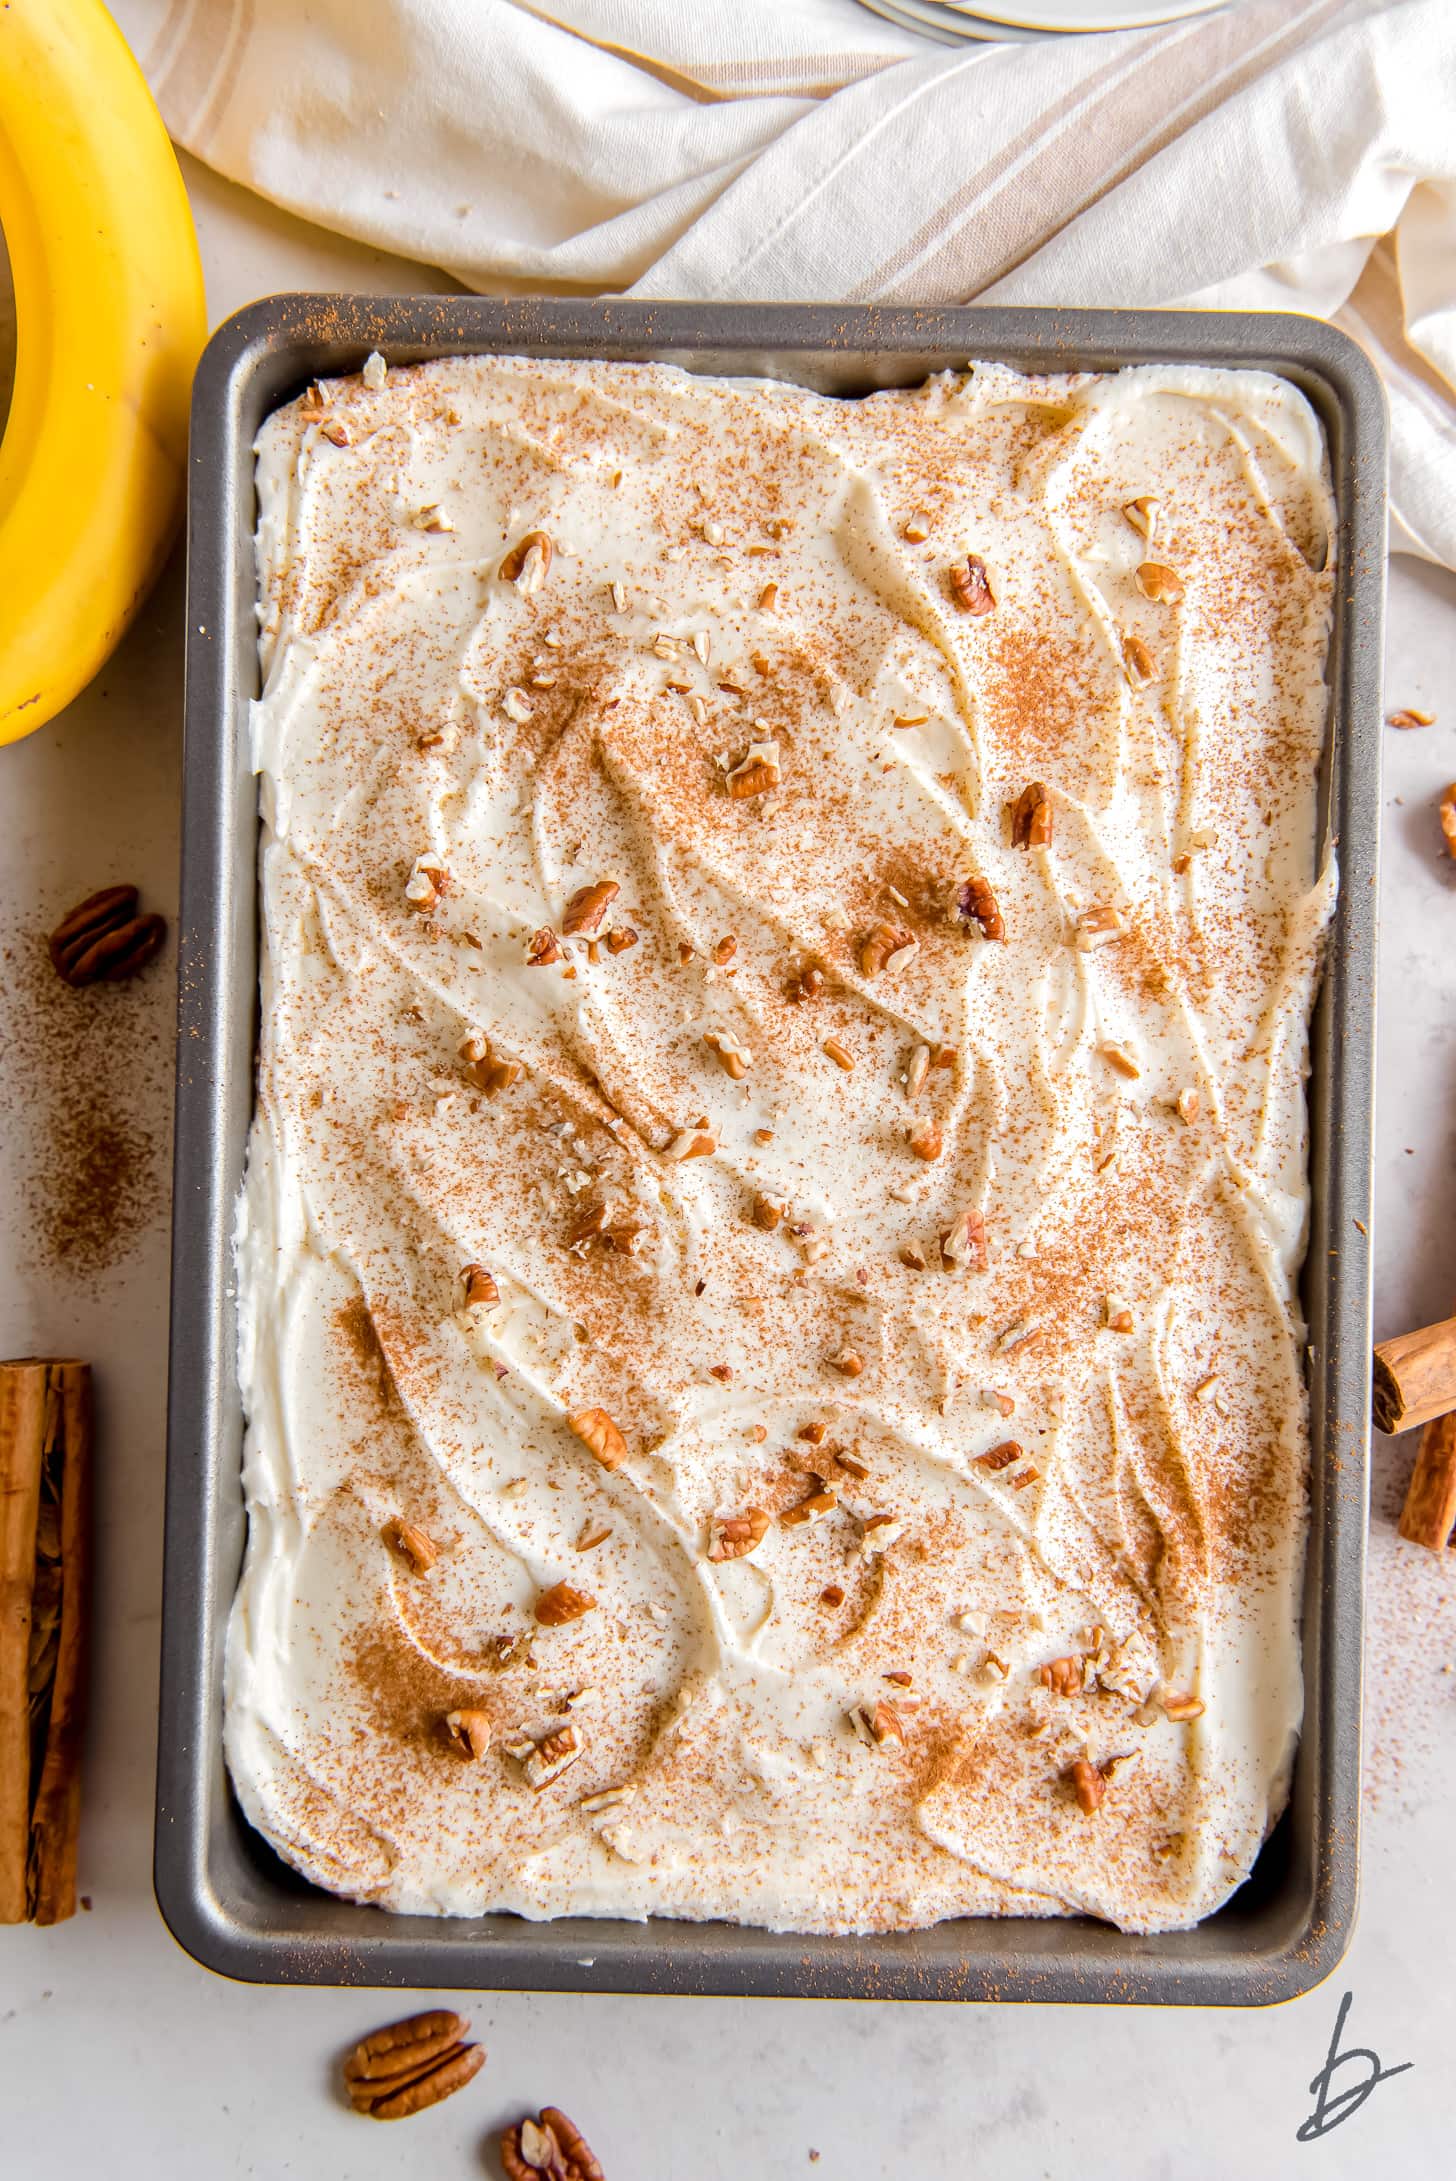 banana cake with cream cheese frosting and dusting of cinnamon in a 9-inch by 13-inch cake pan